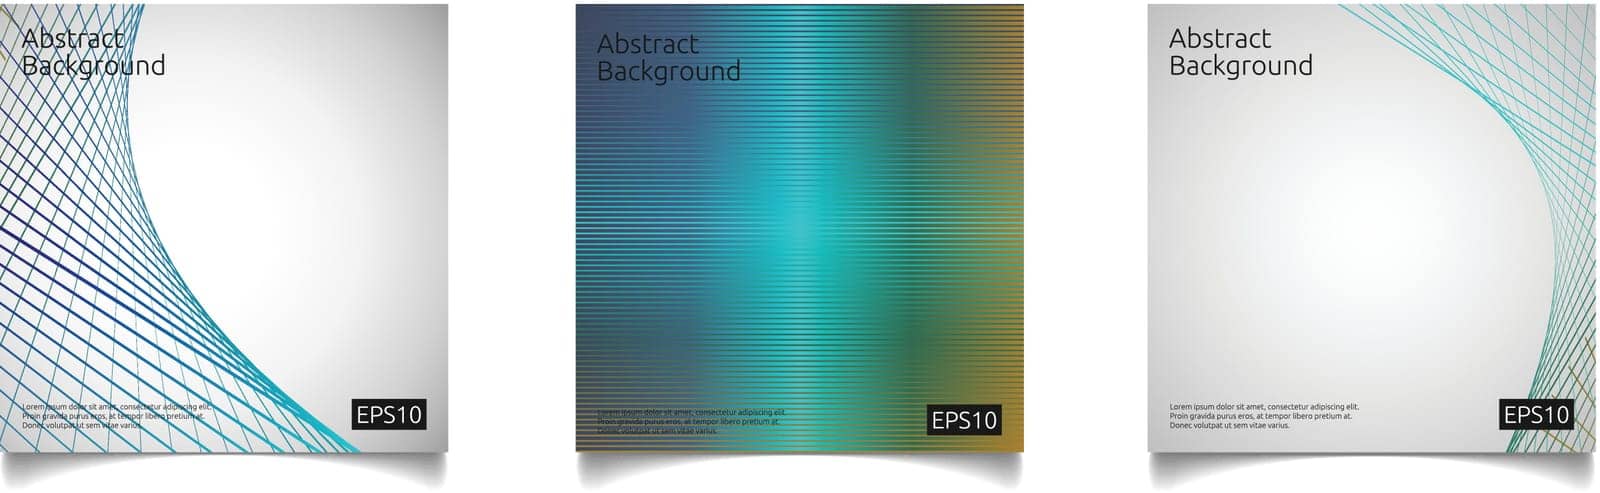 space,cover,presentation,white,trendy,stripe,dynamic,flow,element,energy,tech,shape,backdrop,creative,light,science,geometric,style,poster,colorful,template,color,curve,line,concept,pattern,speed,wave,network,minimal,futuristic,modern,design,vector,graphic,mesh,smooth,digital,brochure,wallpaper,business,motion,texture,abstraction,gradient,banner,abstract,technology,structure,geometry,illustration by ogqcorp